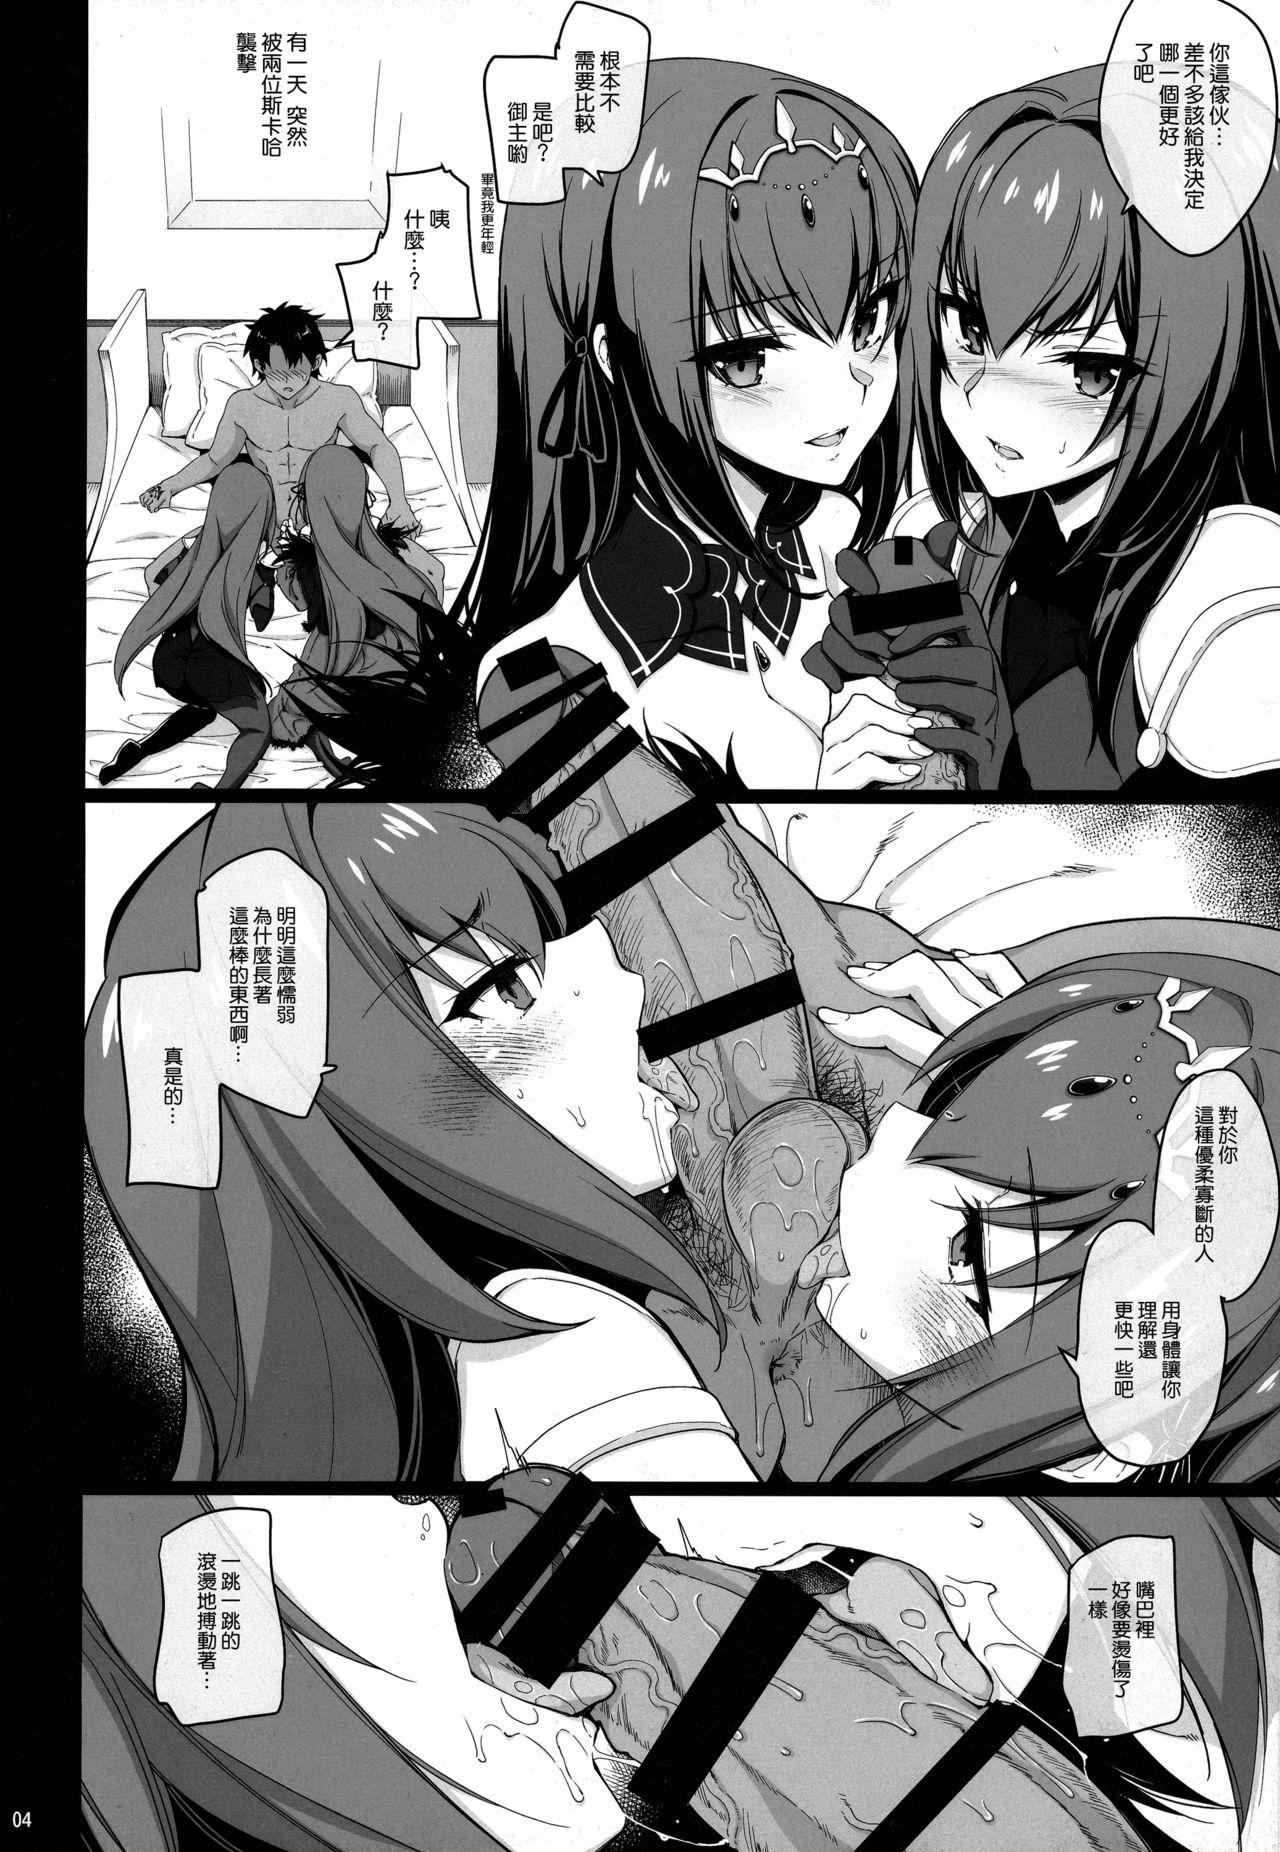 Short Hair Dochira no Scathach Show - Fate grand order Seduction Porn - Page 4